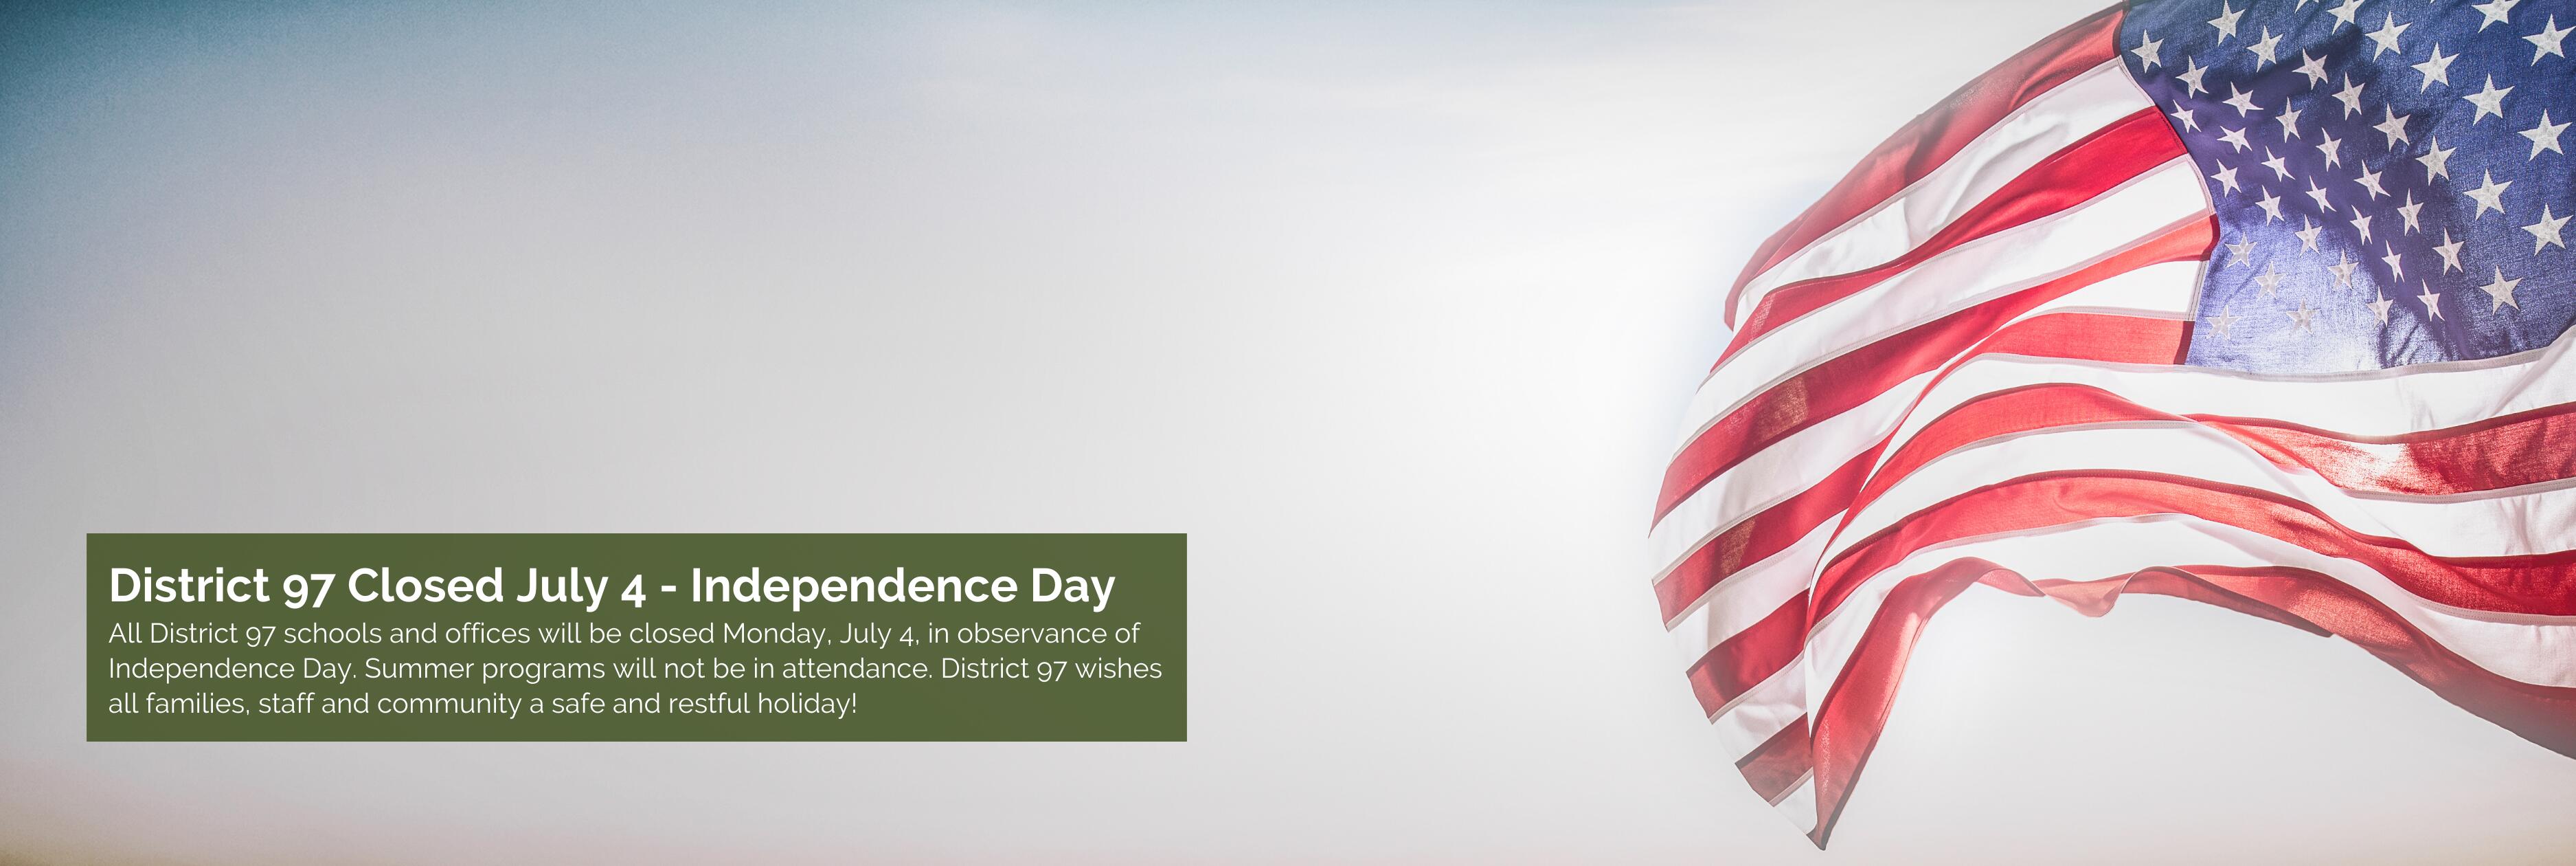 District 97 Closed July 4 - Independence Day